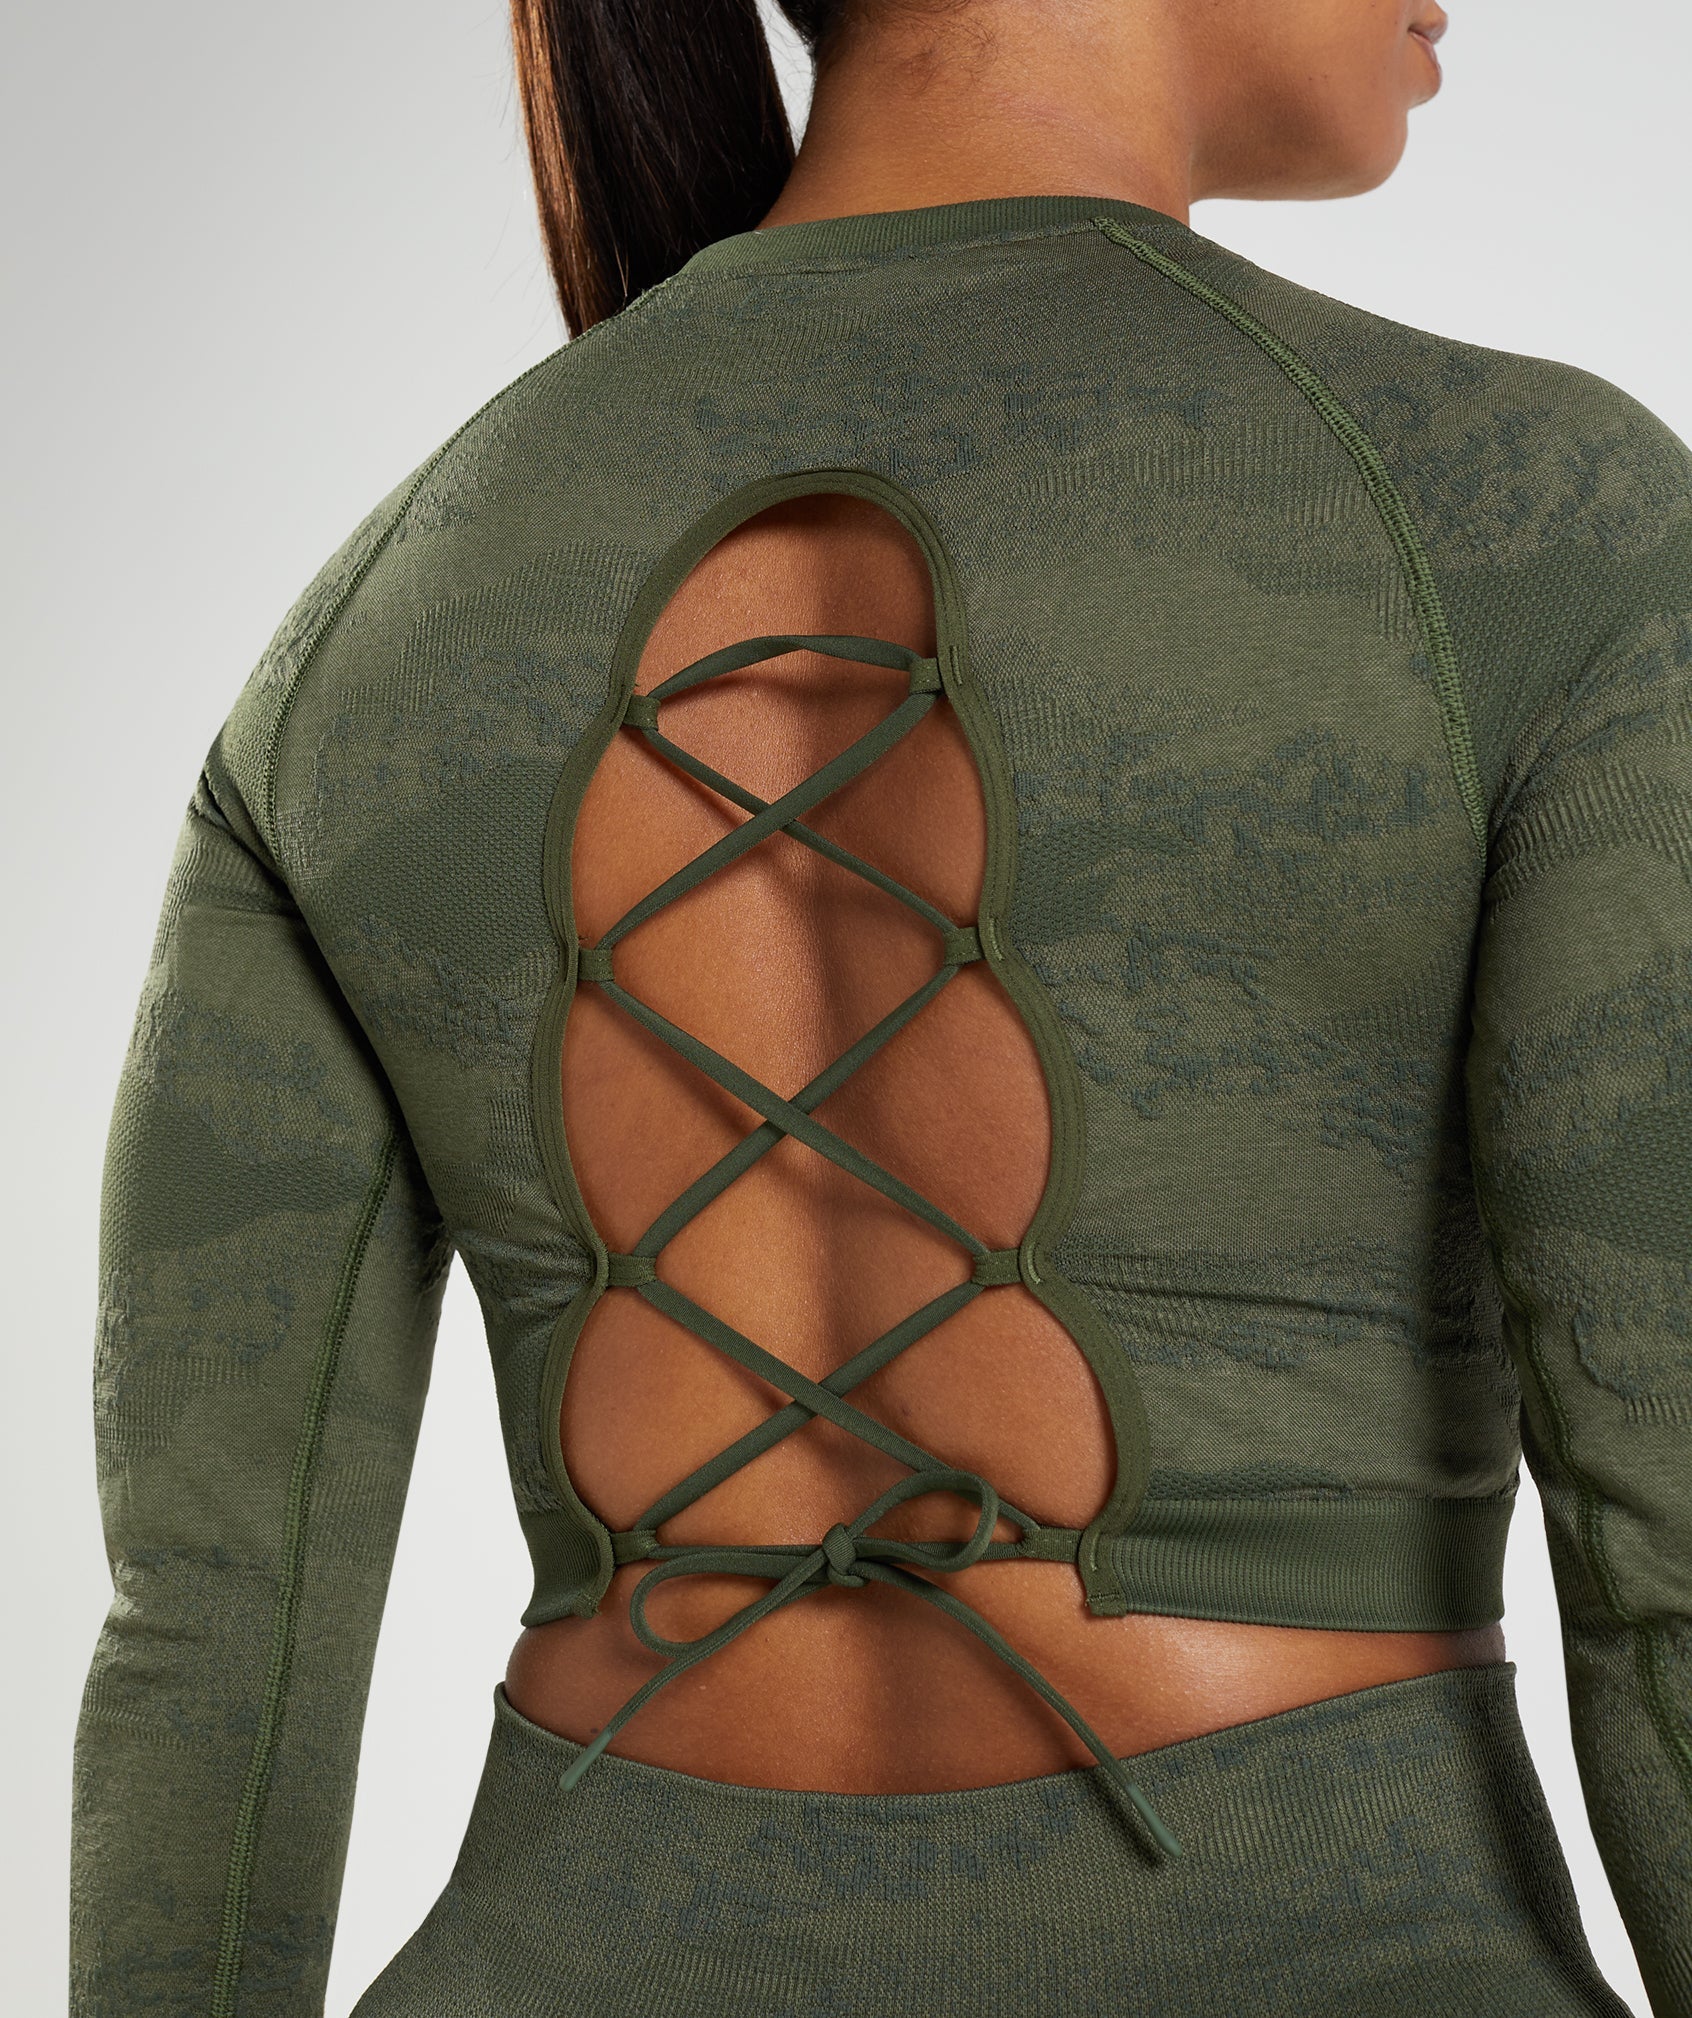 Adapt Camo Seamless Lace Up Back Top, Women's Fashion, Activewear